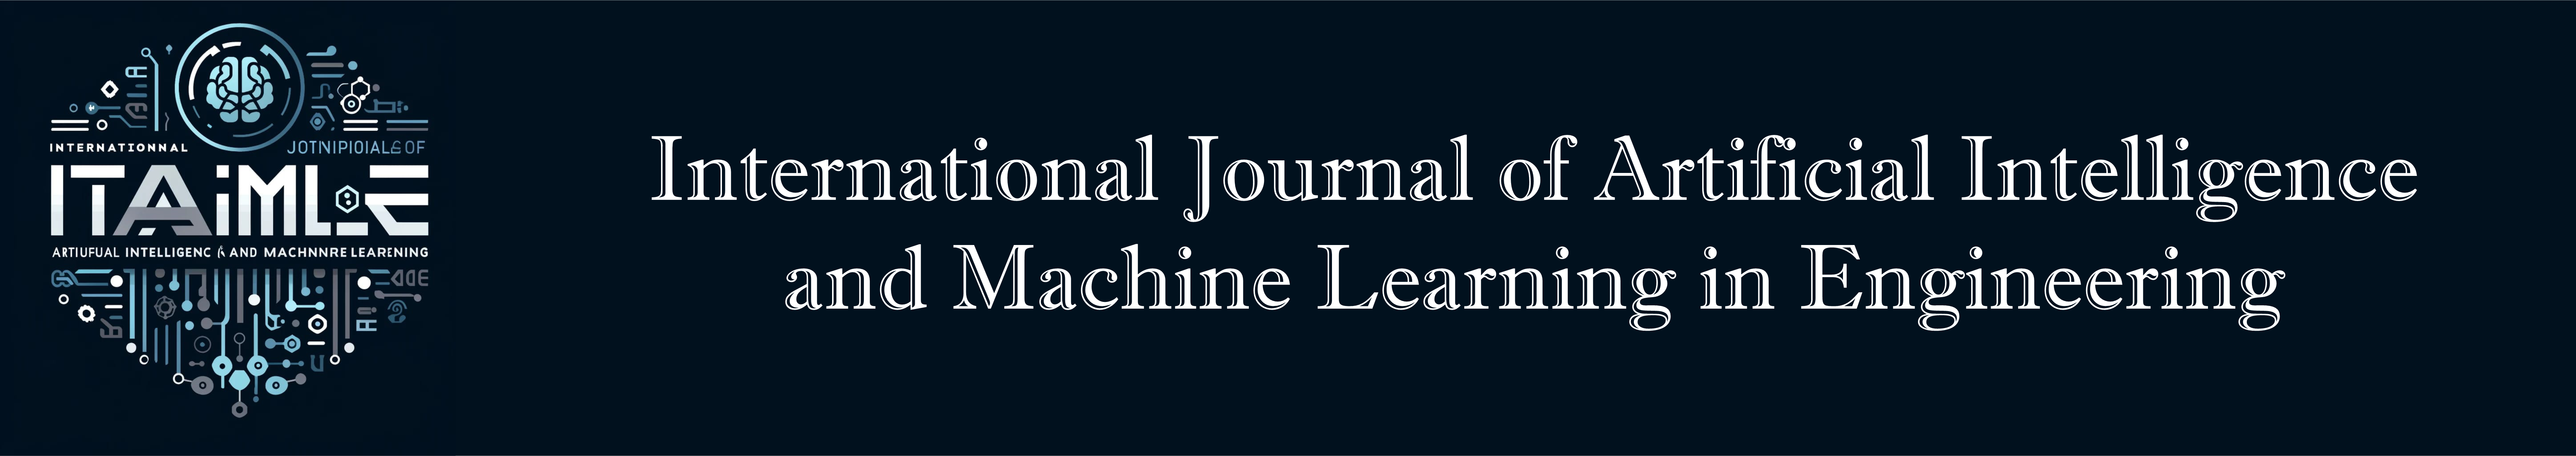 International Journal of Artificial Intelligence and Machine Learning in Engineering